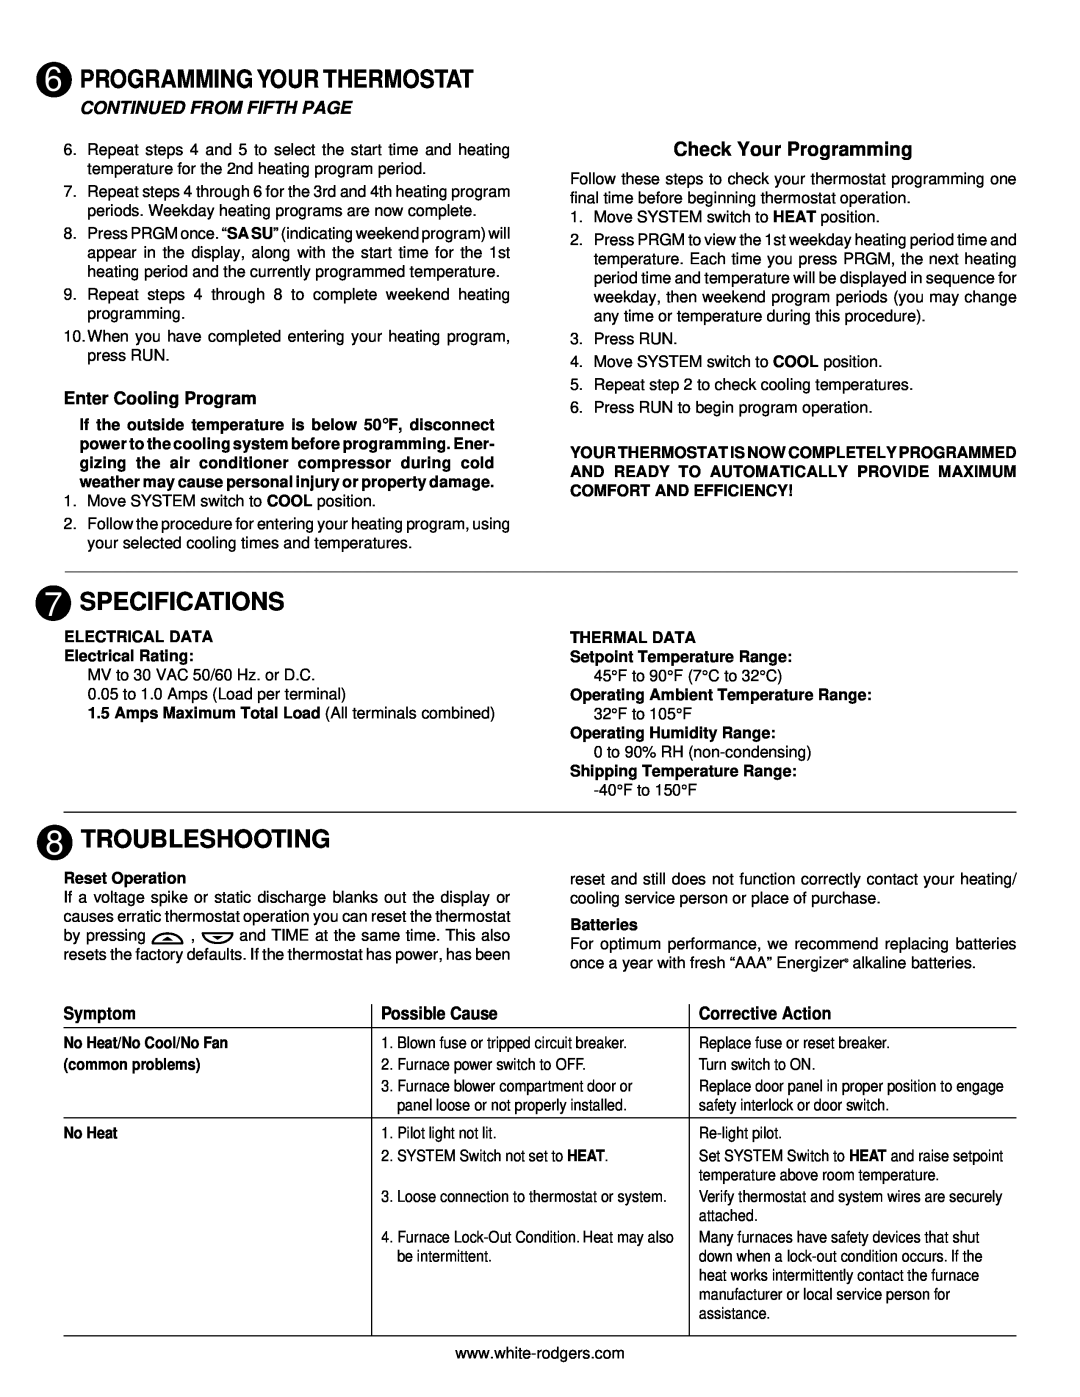 White Rodgers 750 Specifications, Troubleshooting, Check Your Programming, Continued From Fifth Page, Symptom 